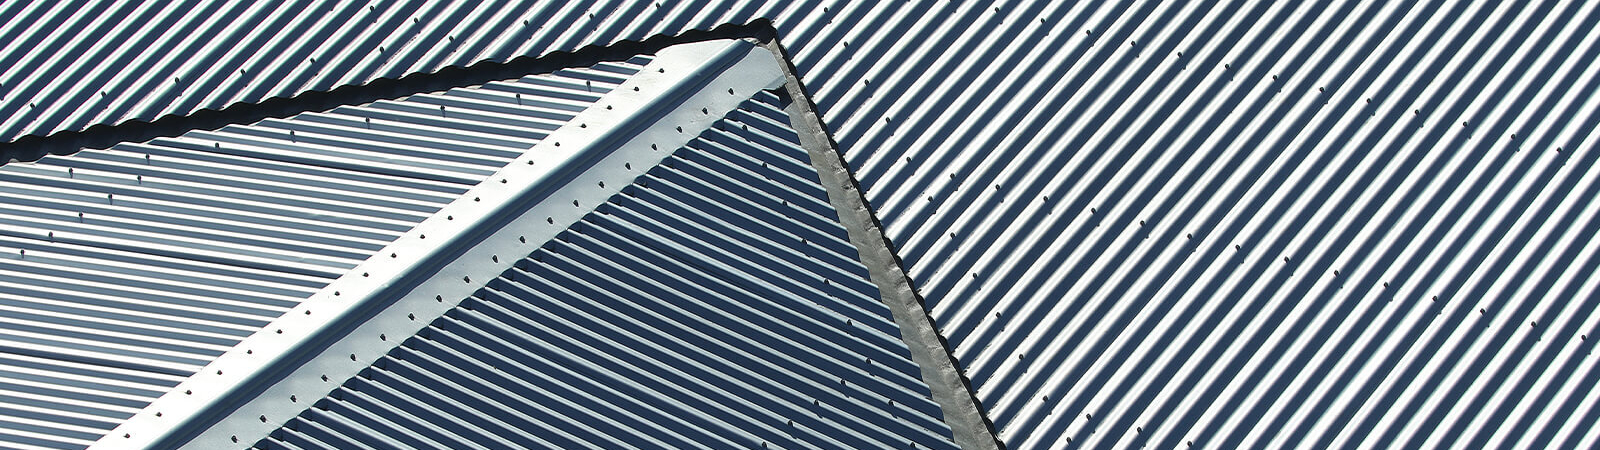 Close up of metal roofs joining at centre of roof